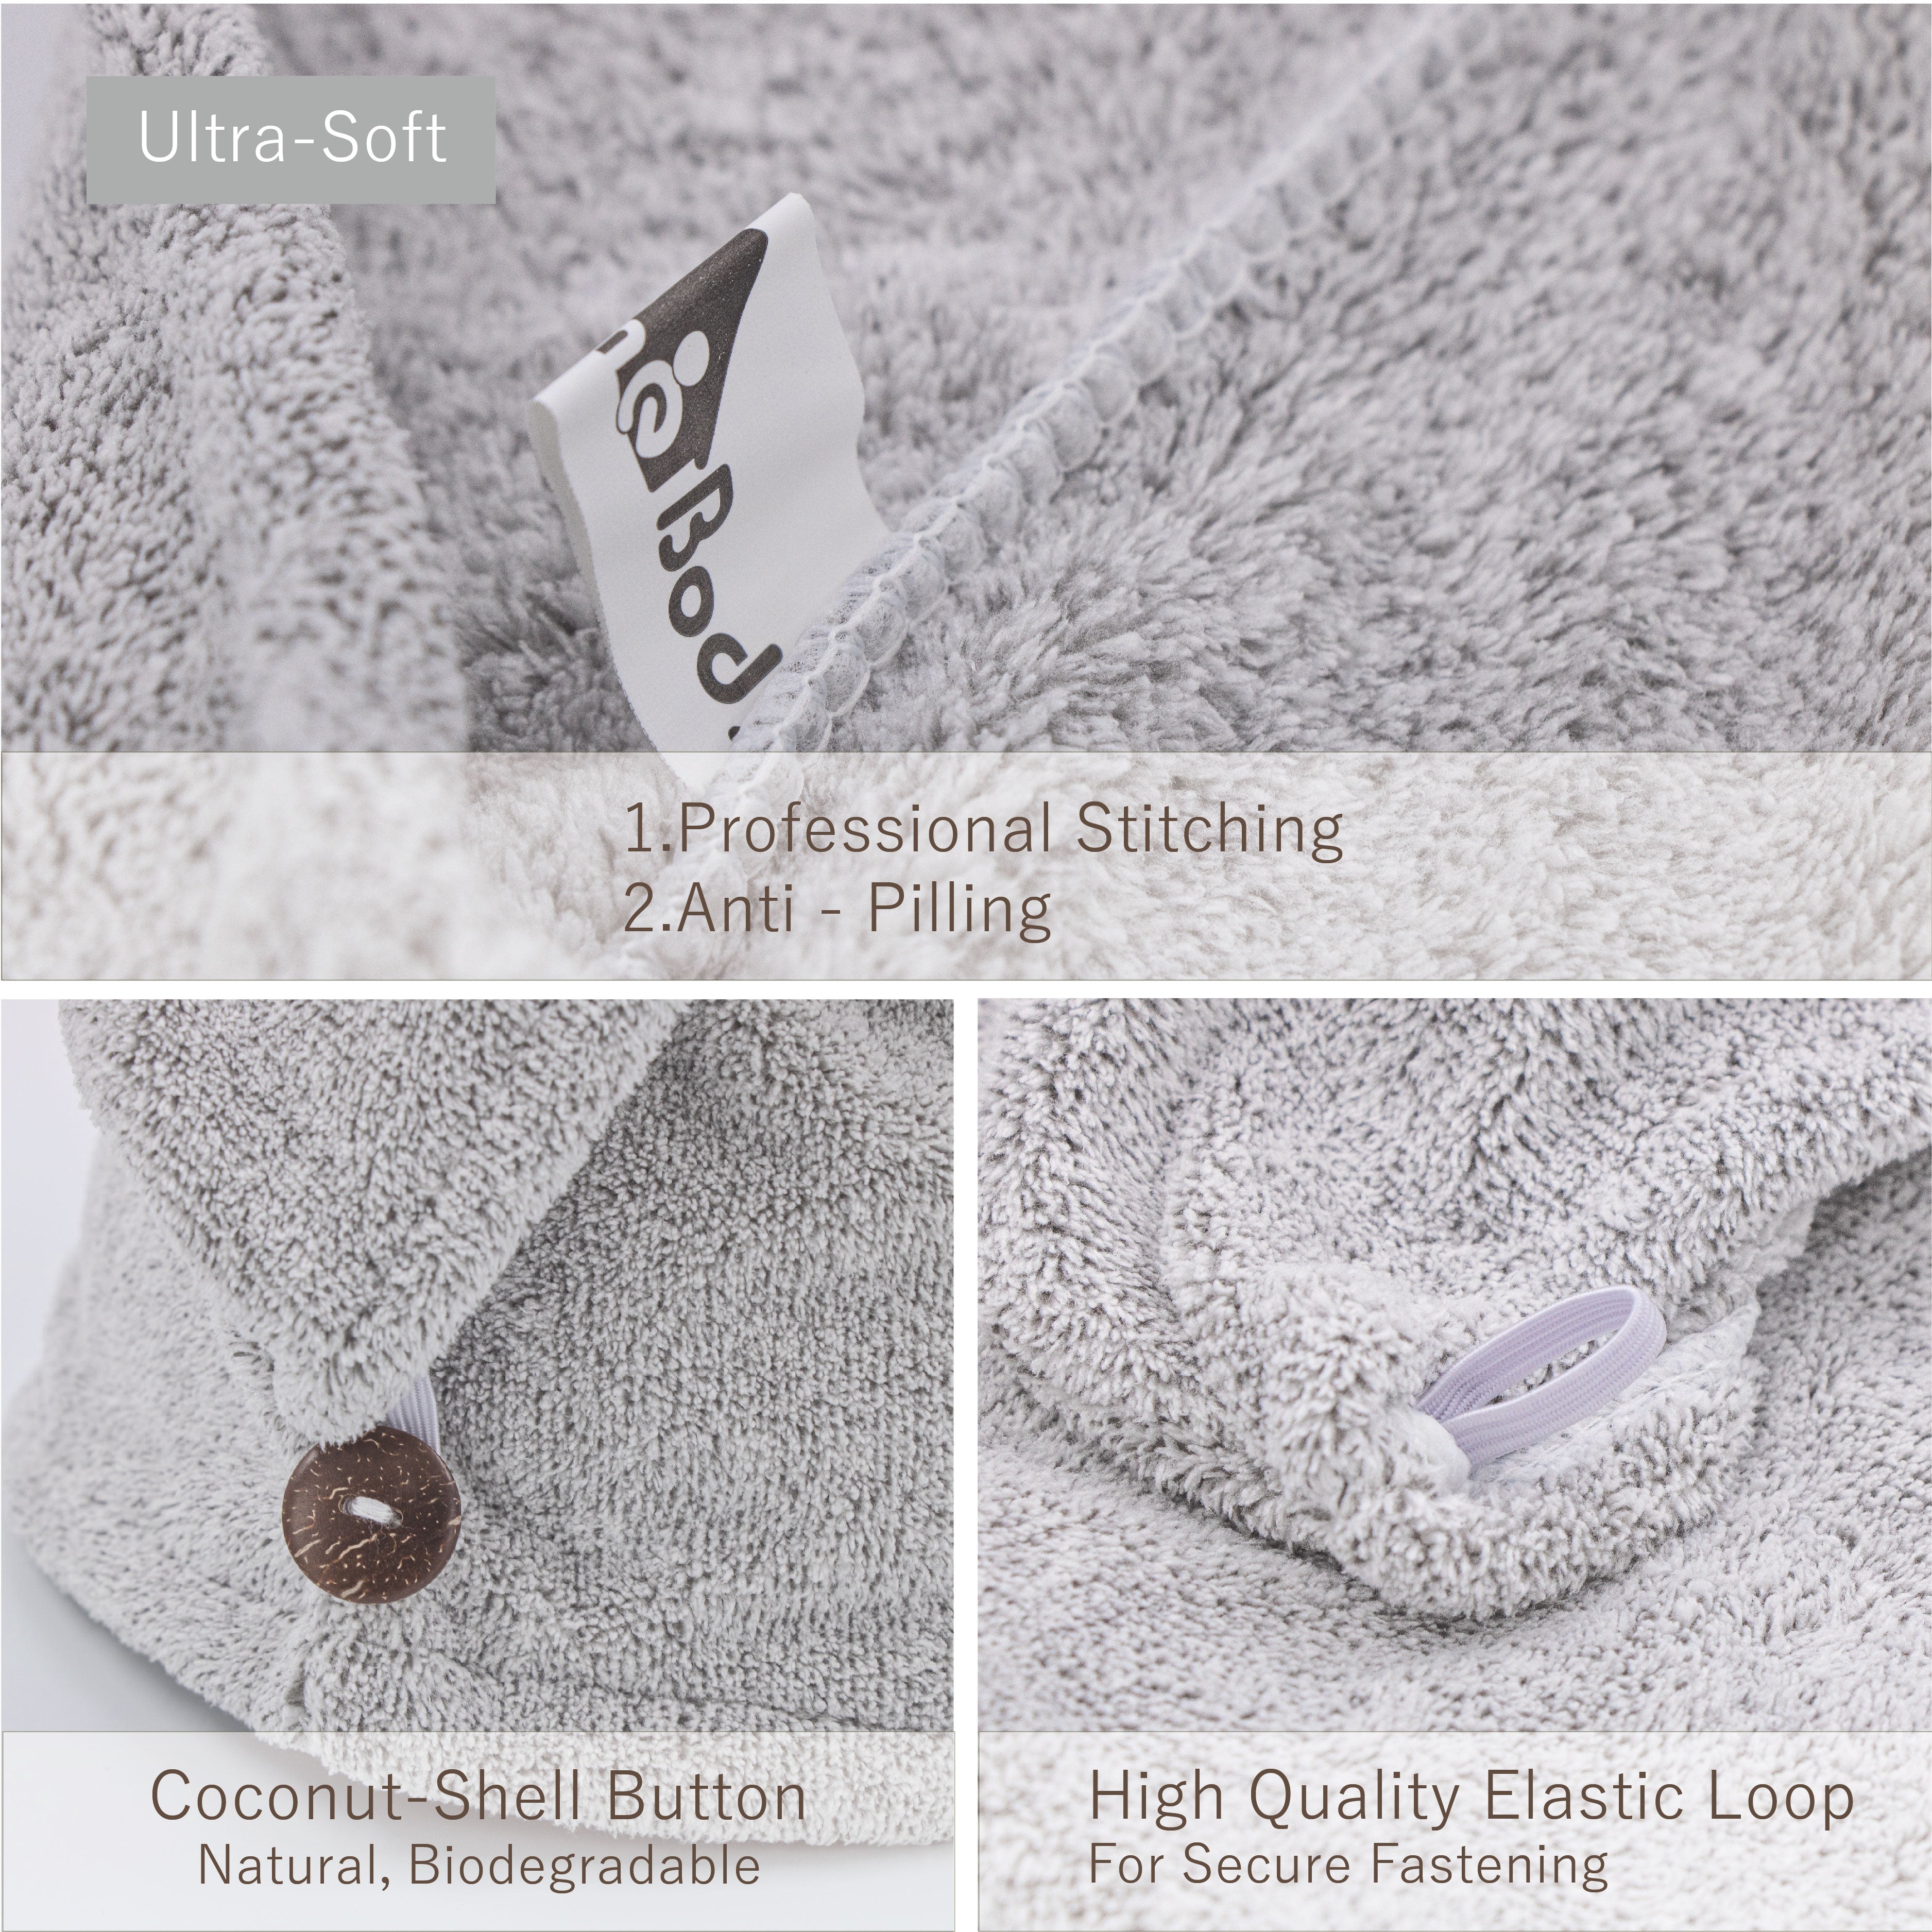 Ultra Soft and Absorbent Anti-Frizz Charcoal Fiber Hair Towel Wrap with Coconut Shell Button – 2 Pack - Gray